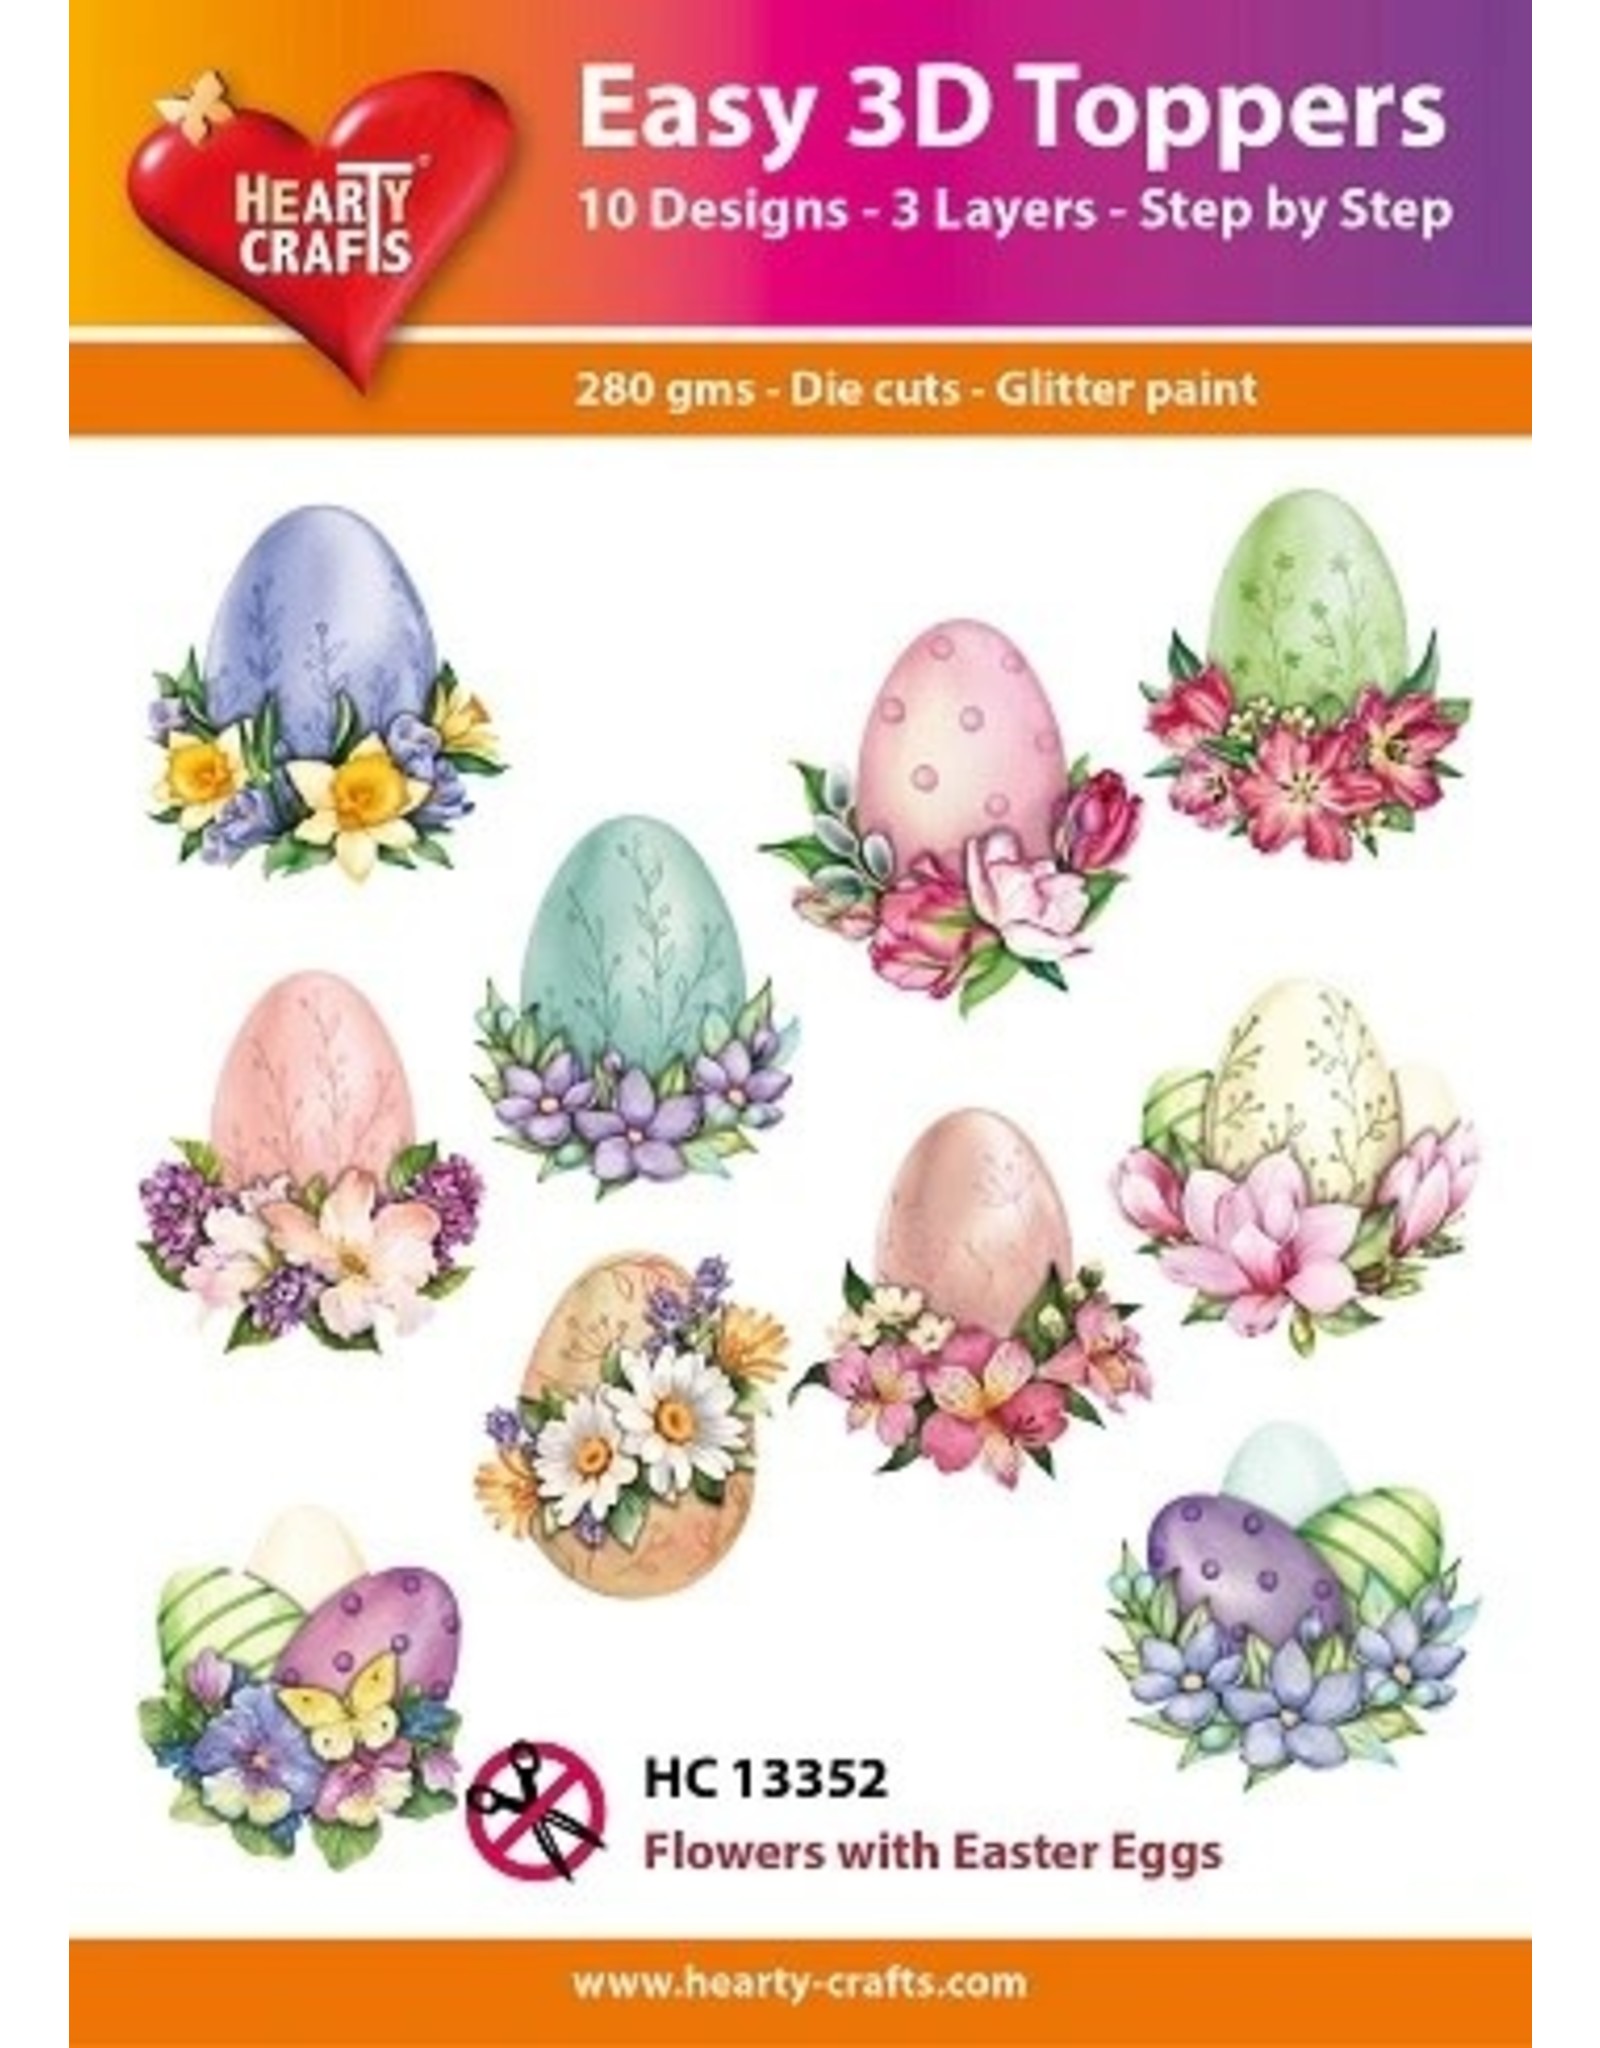 HEARTY CRAFTS HEARTY CRAFTS FLOWERS WITH EASTER EGGS EASY 3D TOPPERS